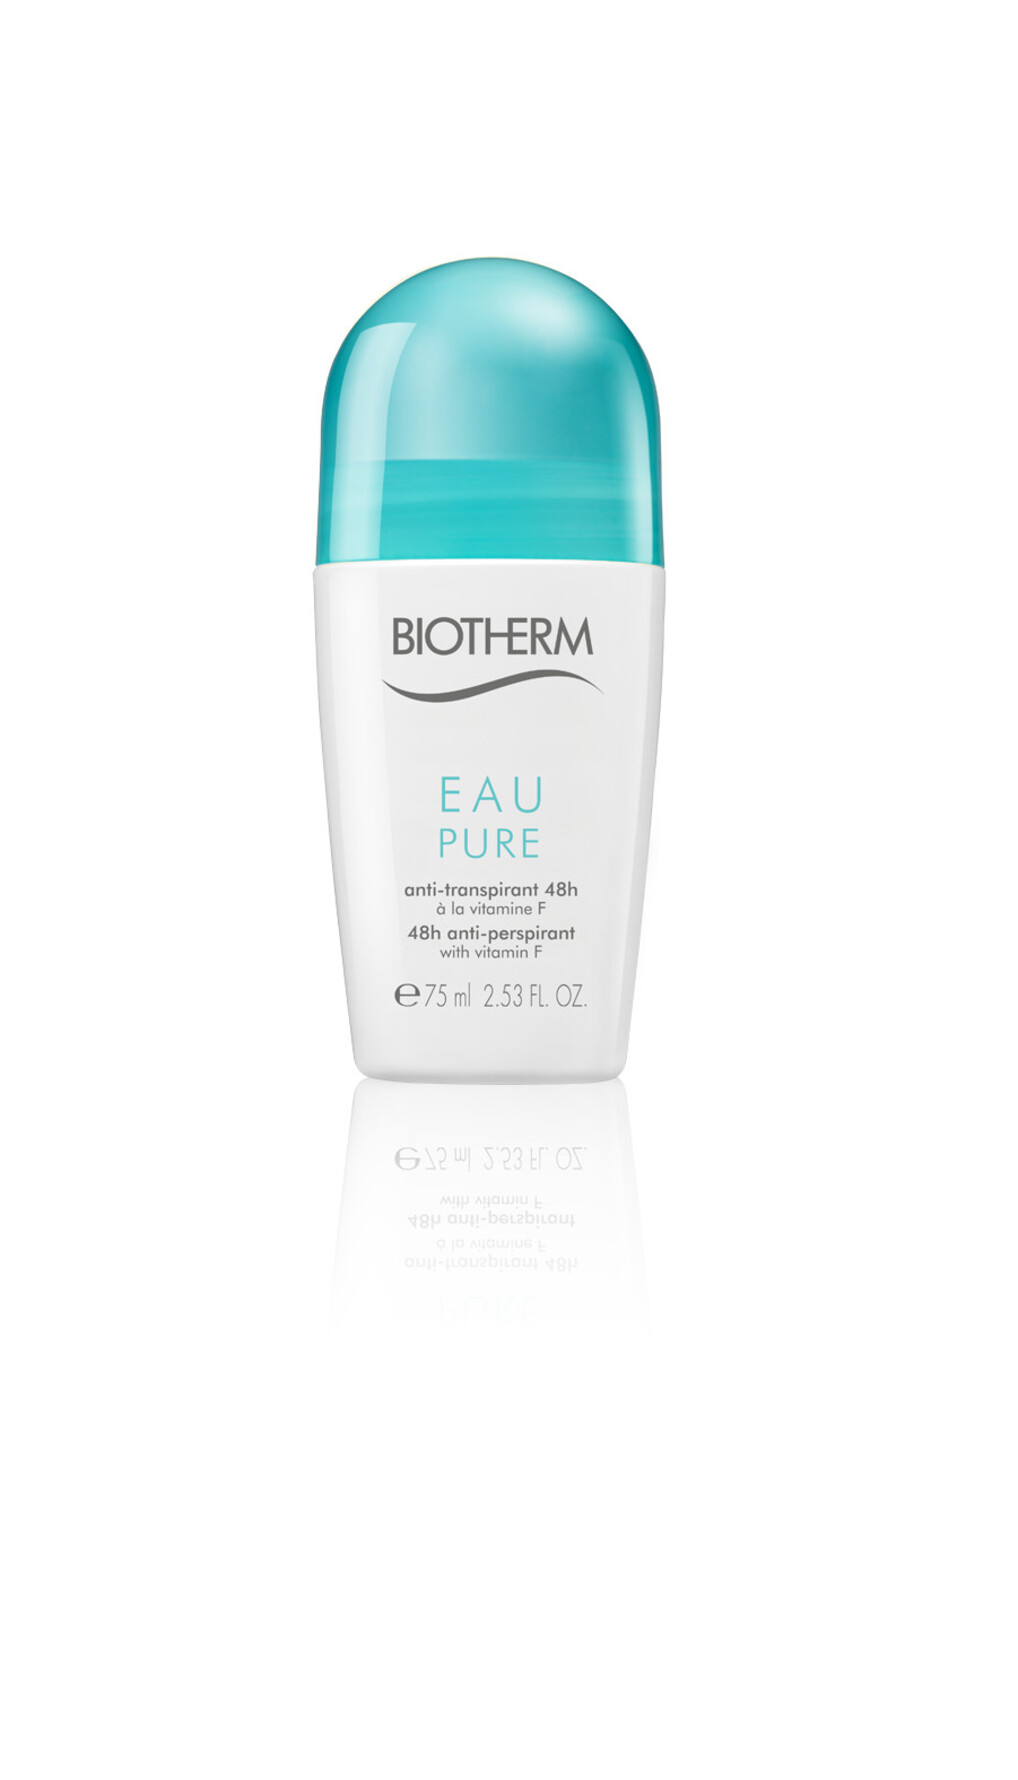 Køb Biotherm Eau Pure Deo On ml Matas